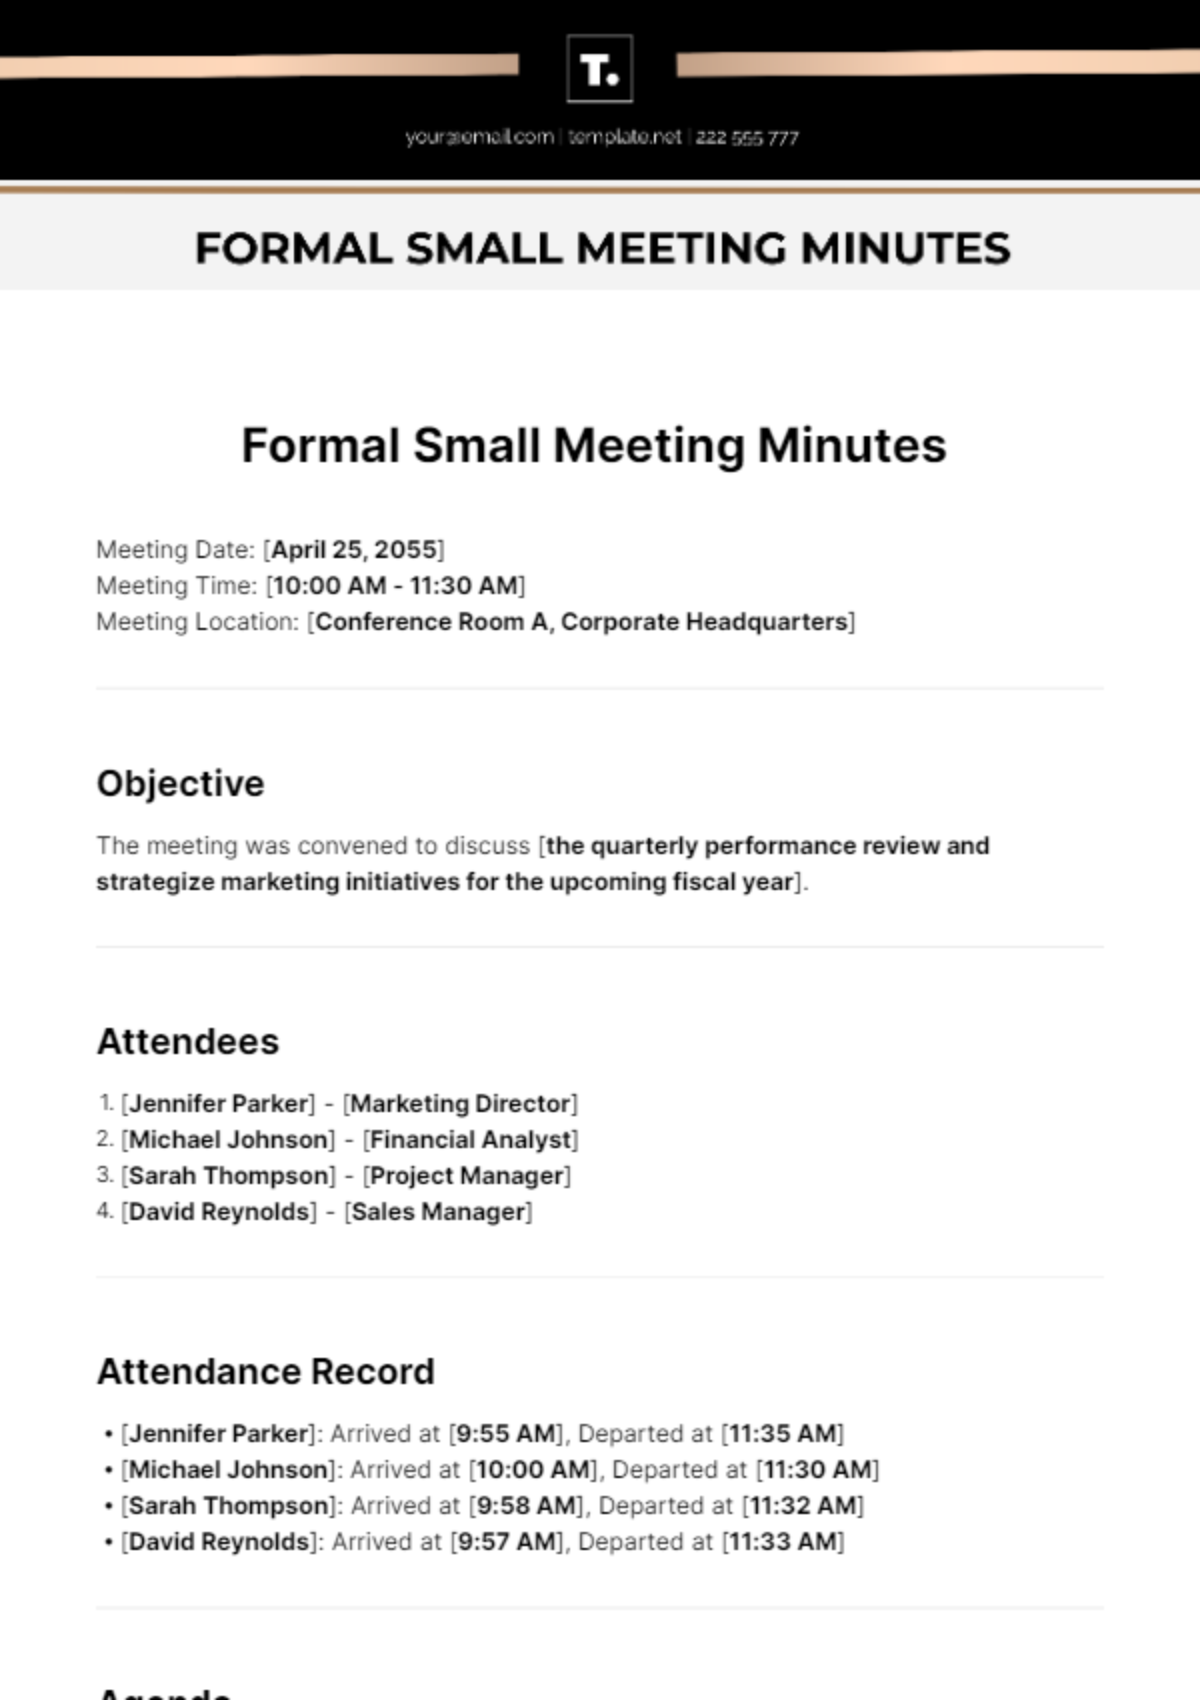 Formal Small Meeting Minutes Template